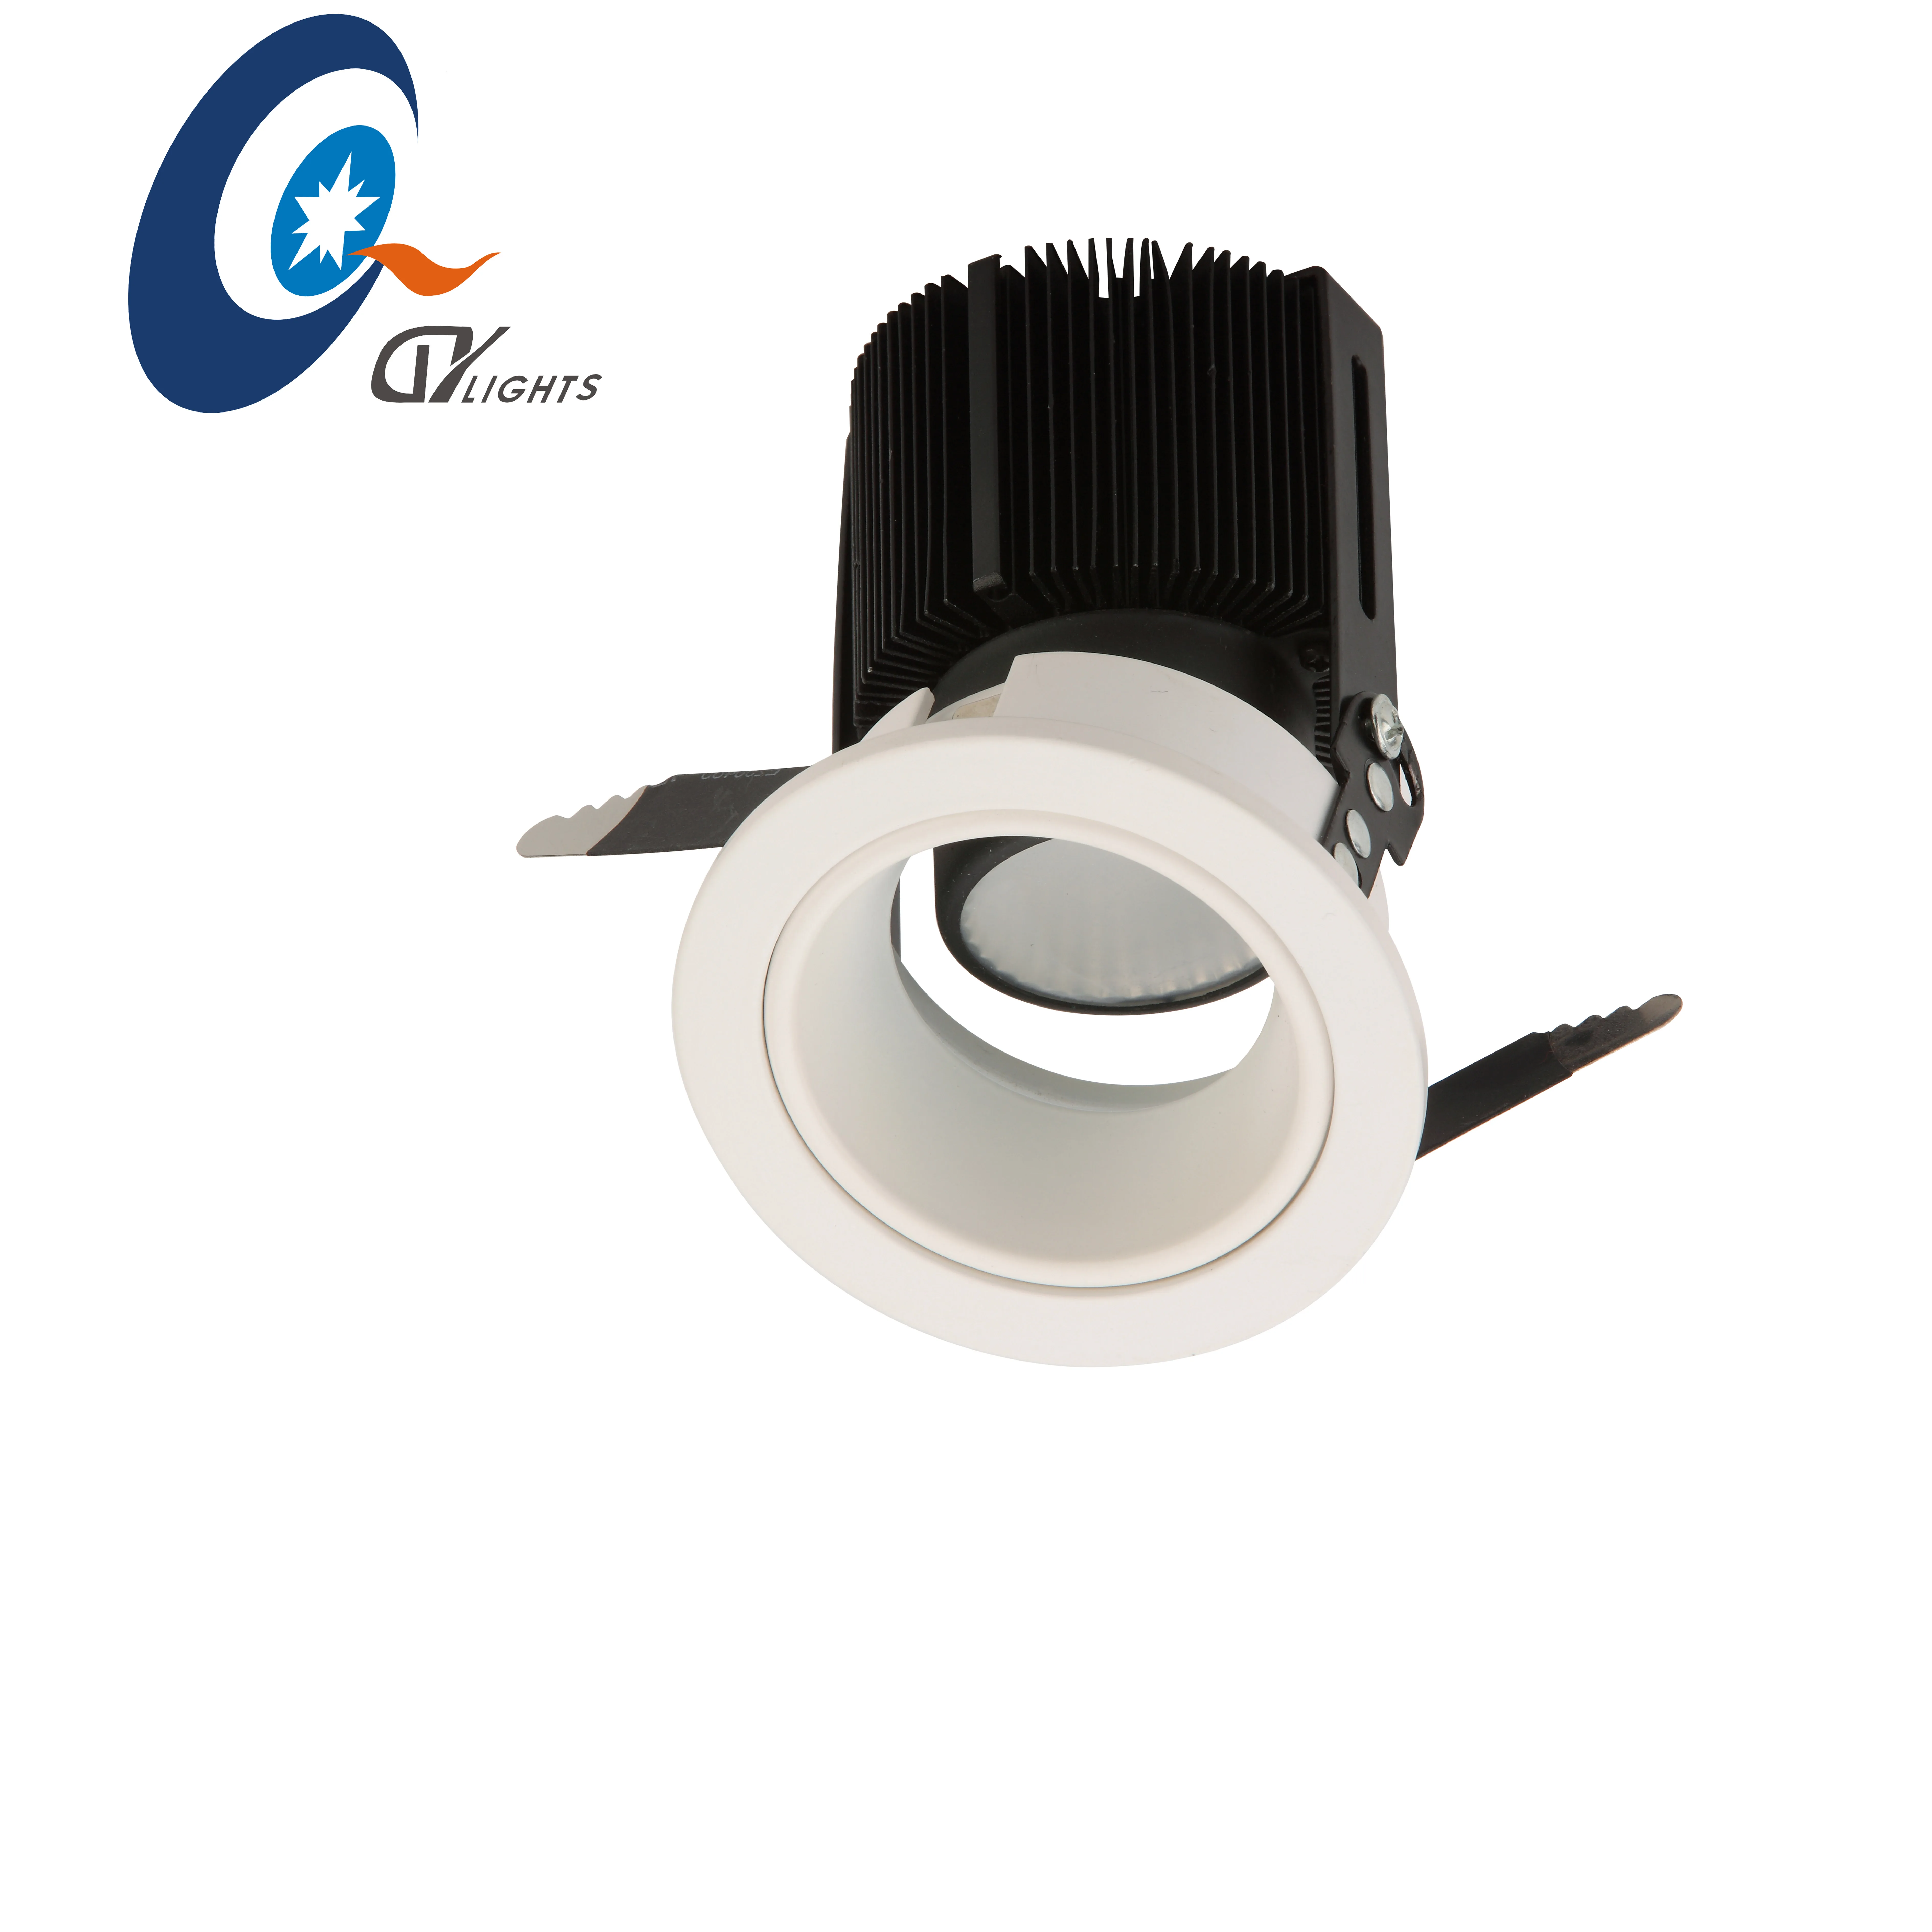 220V 10W Removable Wall Washer Downlight Professional Top Cob Led Spot Light